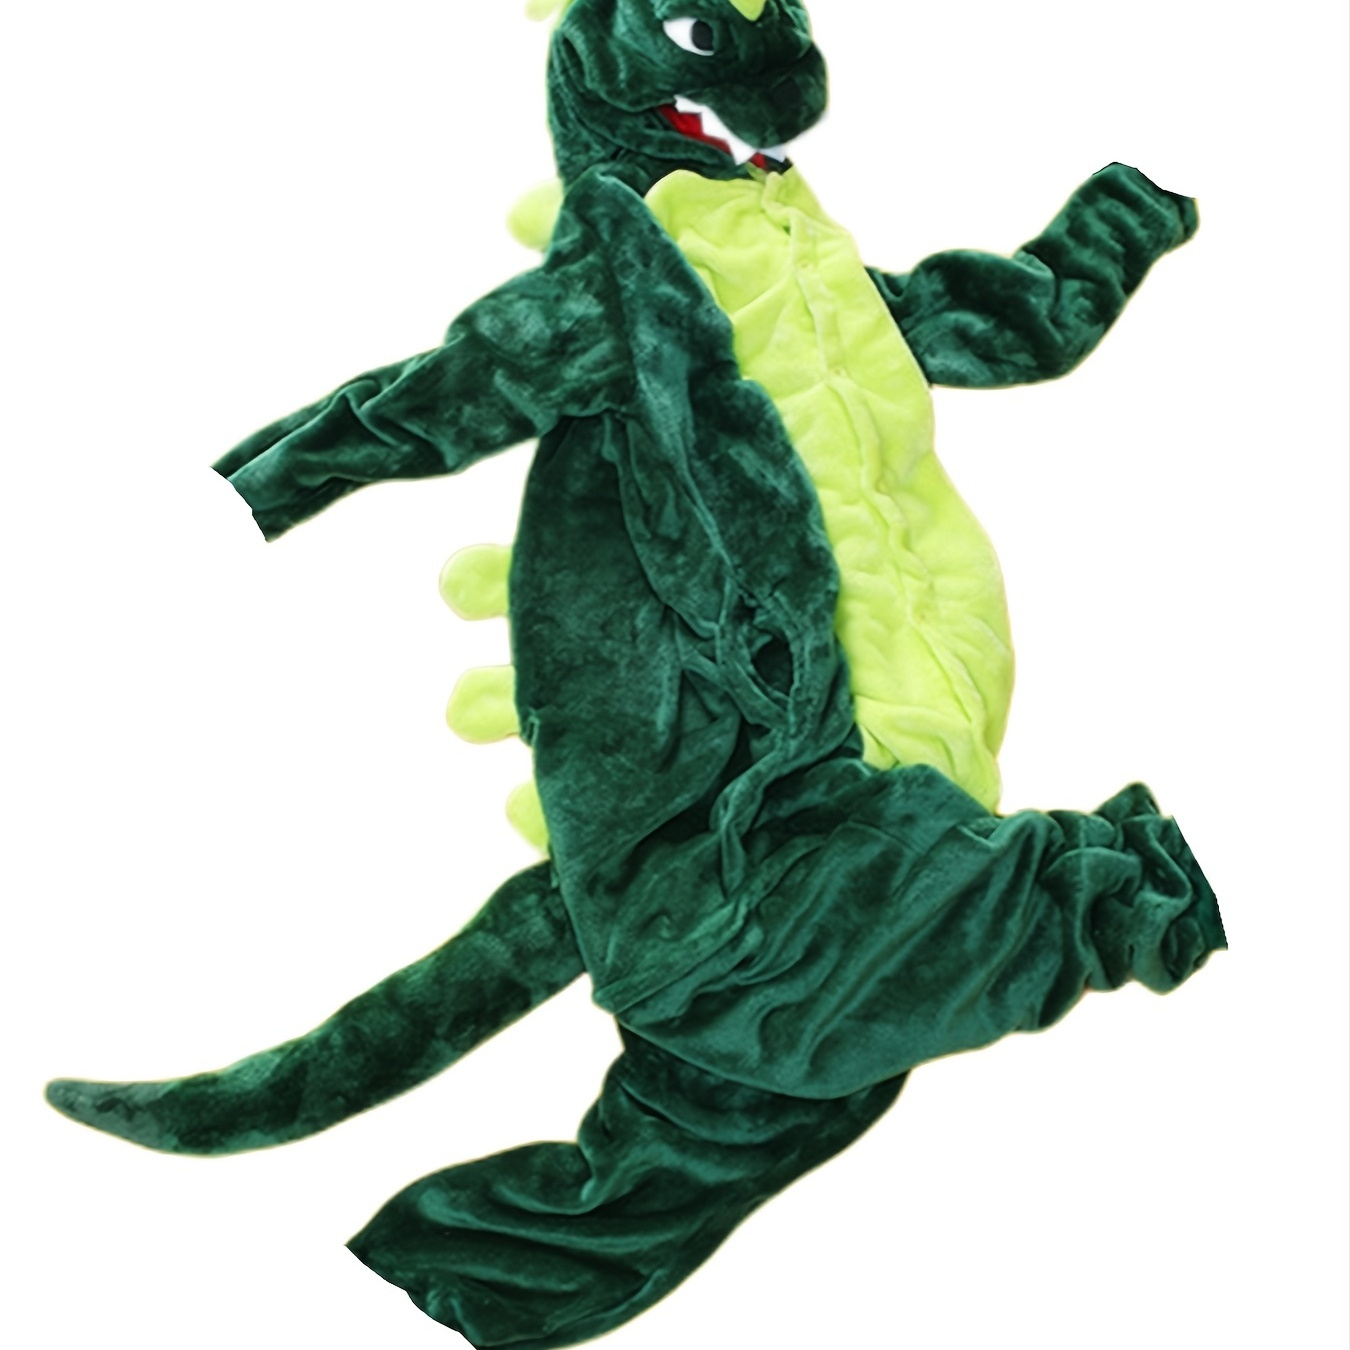 

1 Piece Men's Thick Fleece Dinosaur Hooded Pajamas With Pockets - Cozy Loungewear For Winter Nights